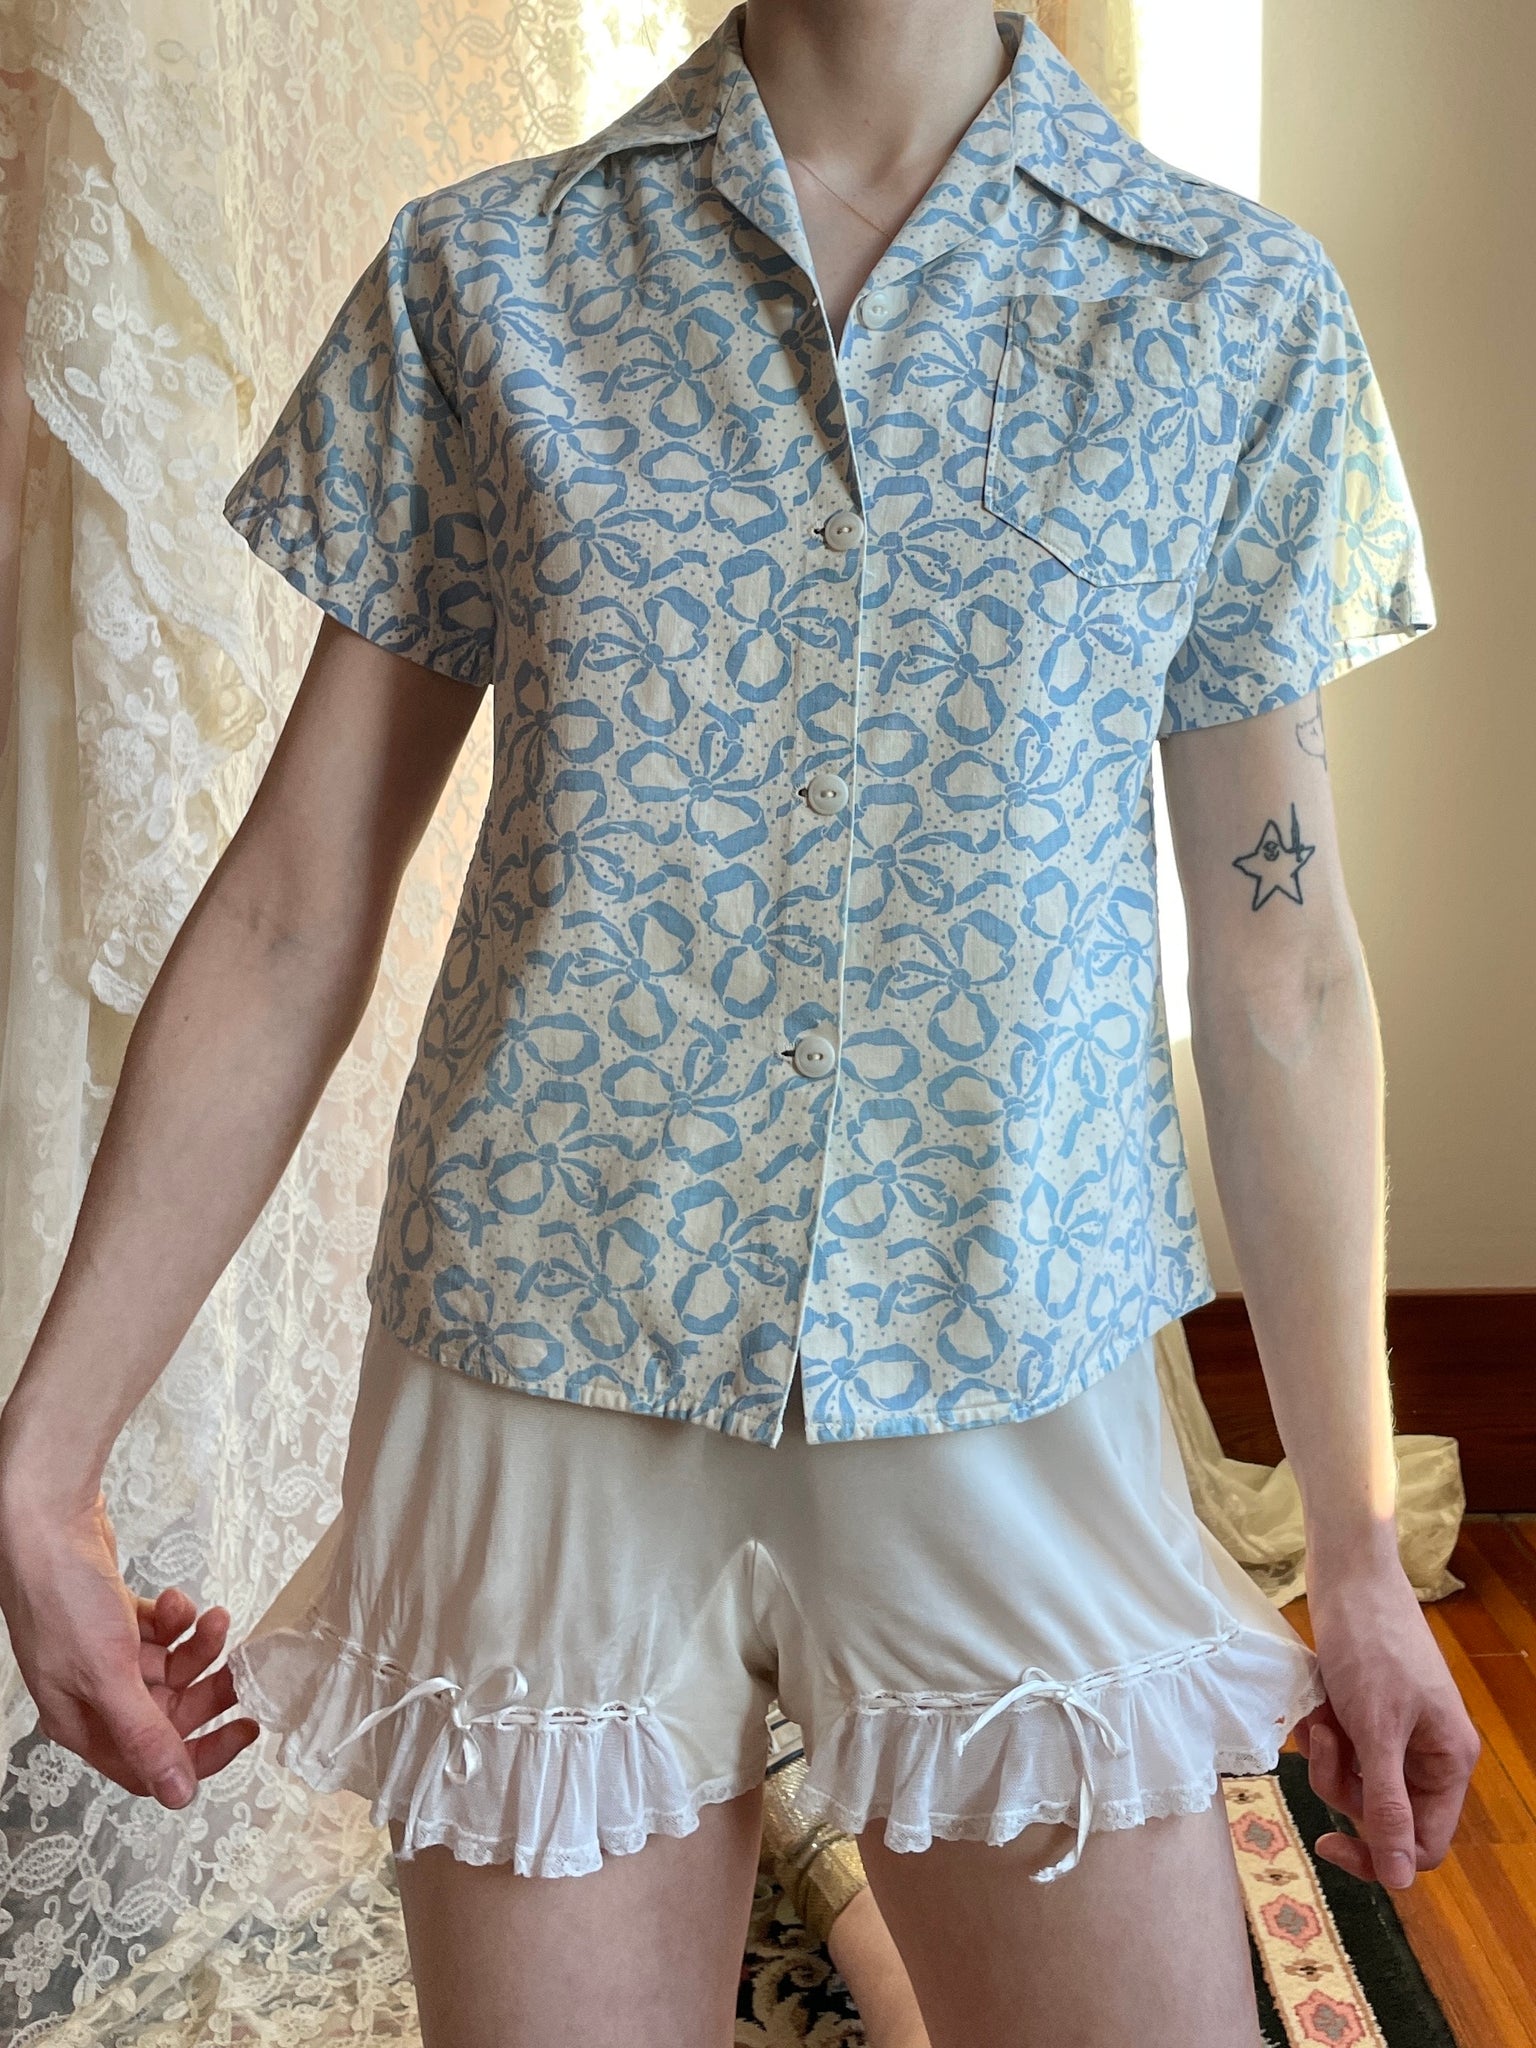 1940s Bow Printed Cotton Blouse White Blue Button Up